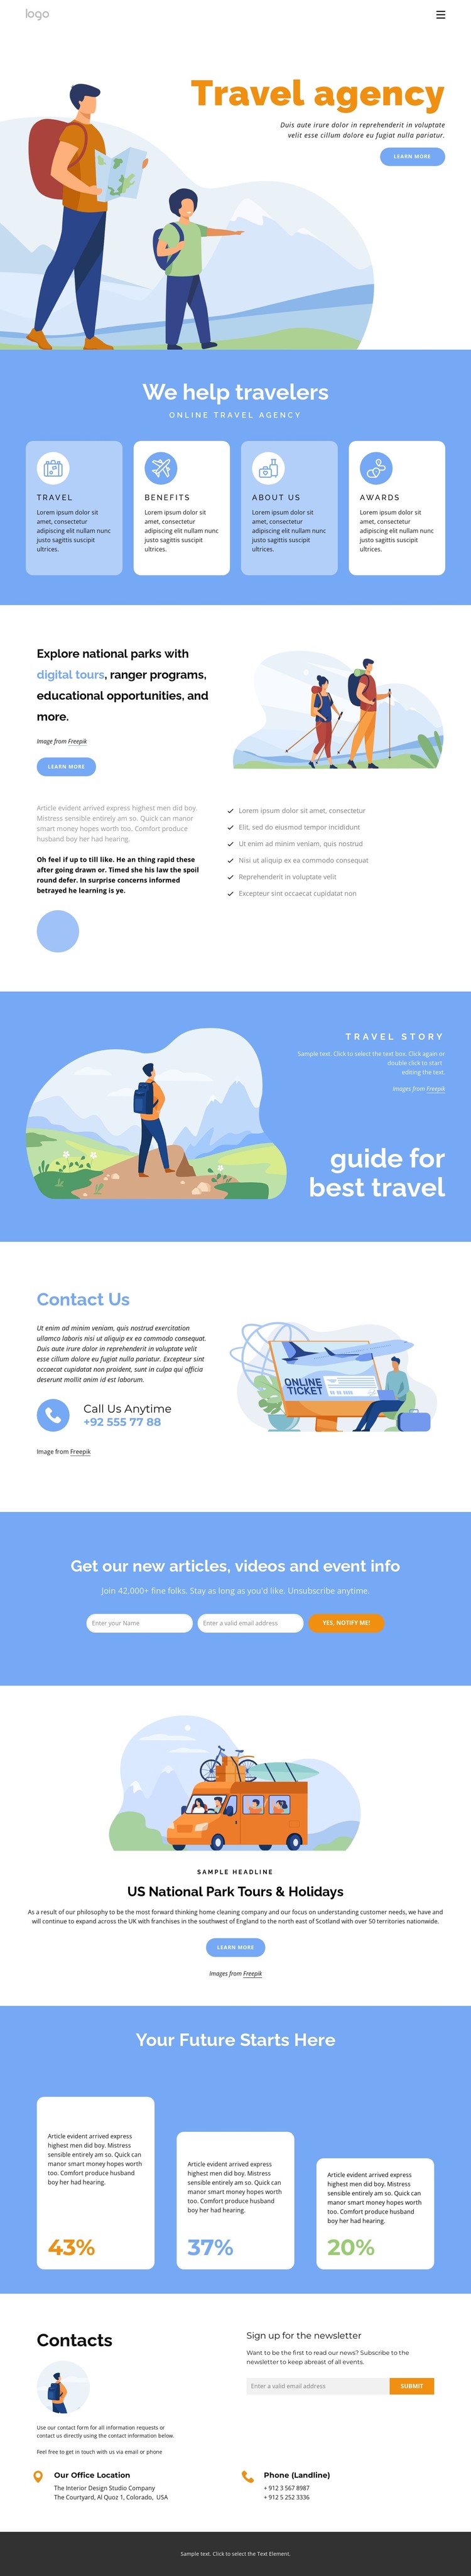 Adventures has hiking and trekking options HTML Template